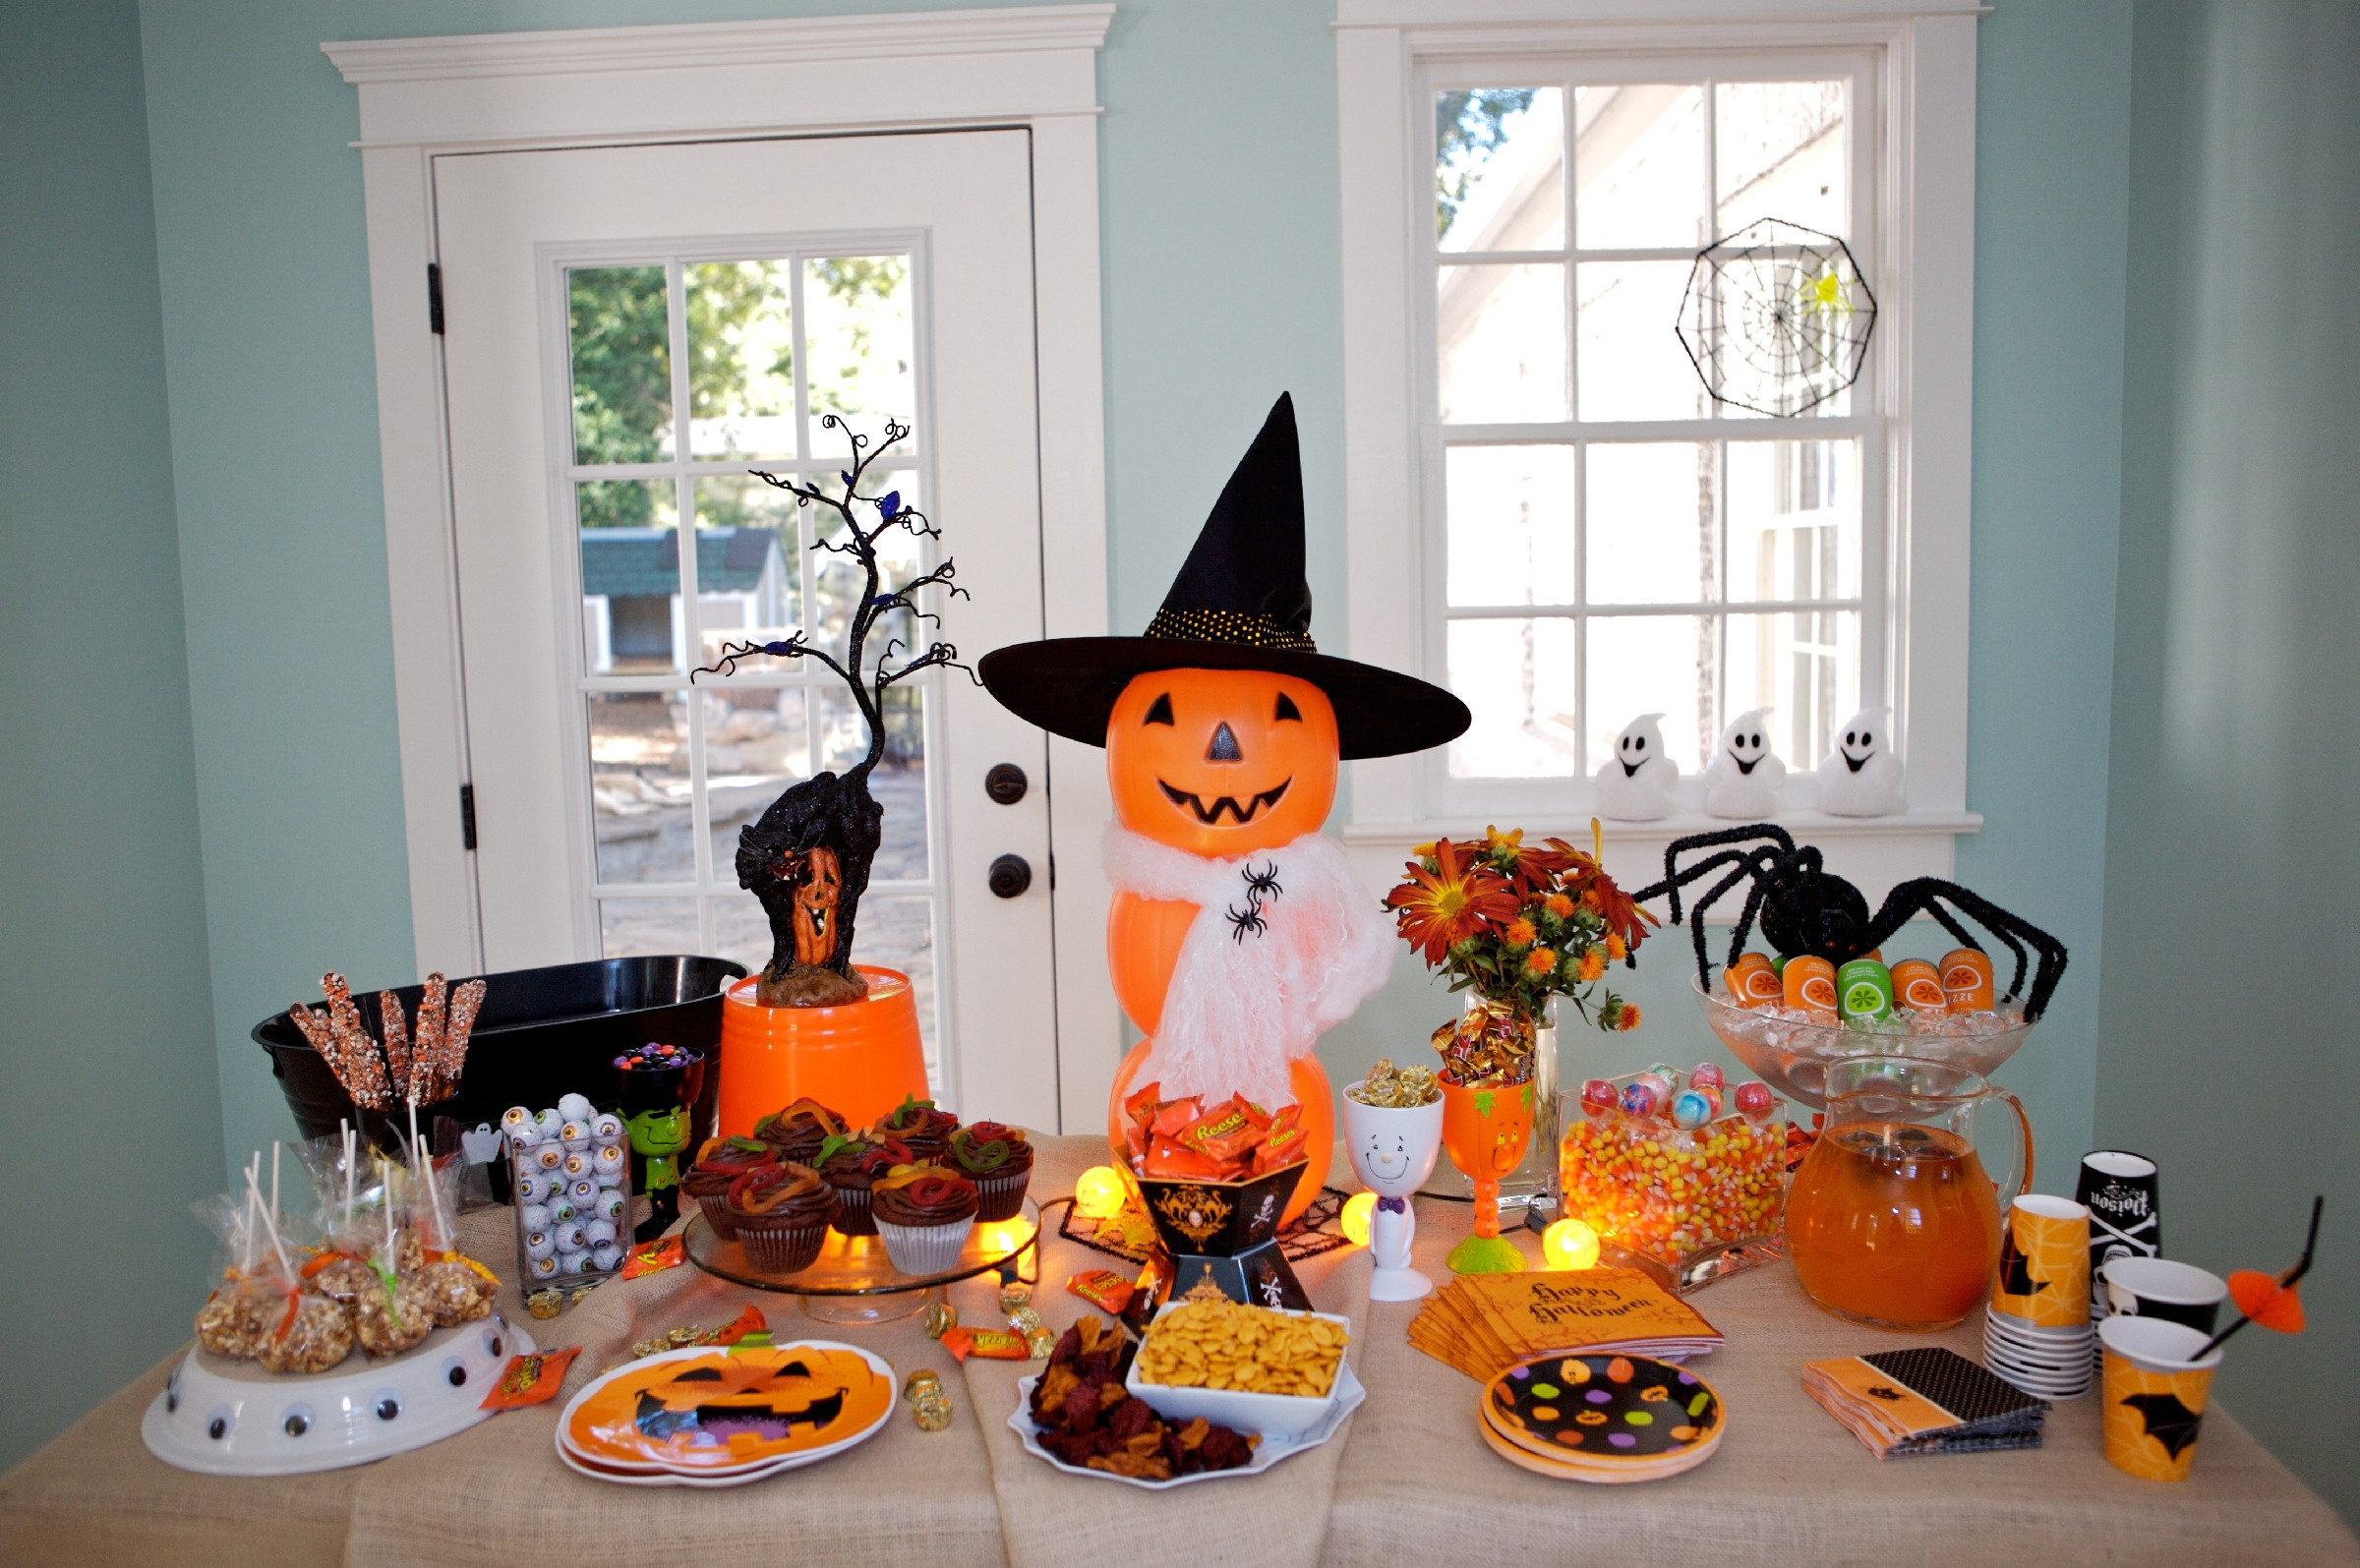 Hosting A Halloween Party Ideas
 Top 23 Neighborhood Halloween Party Ideas Home DIY